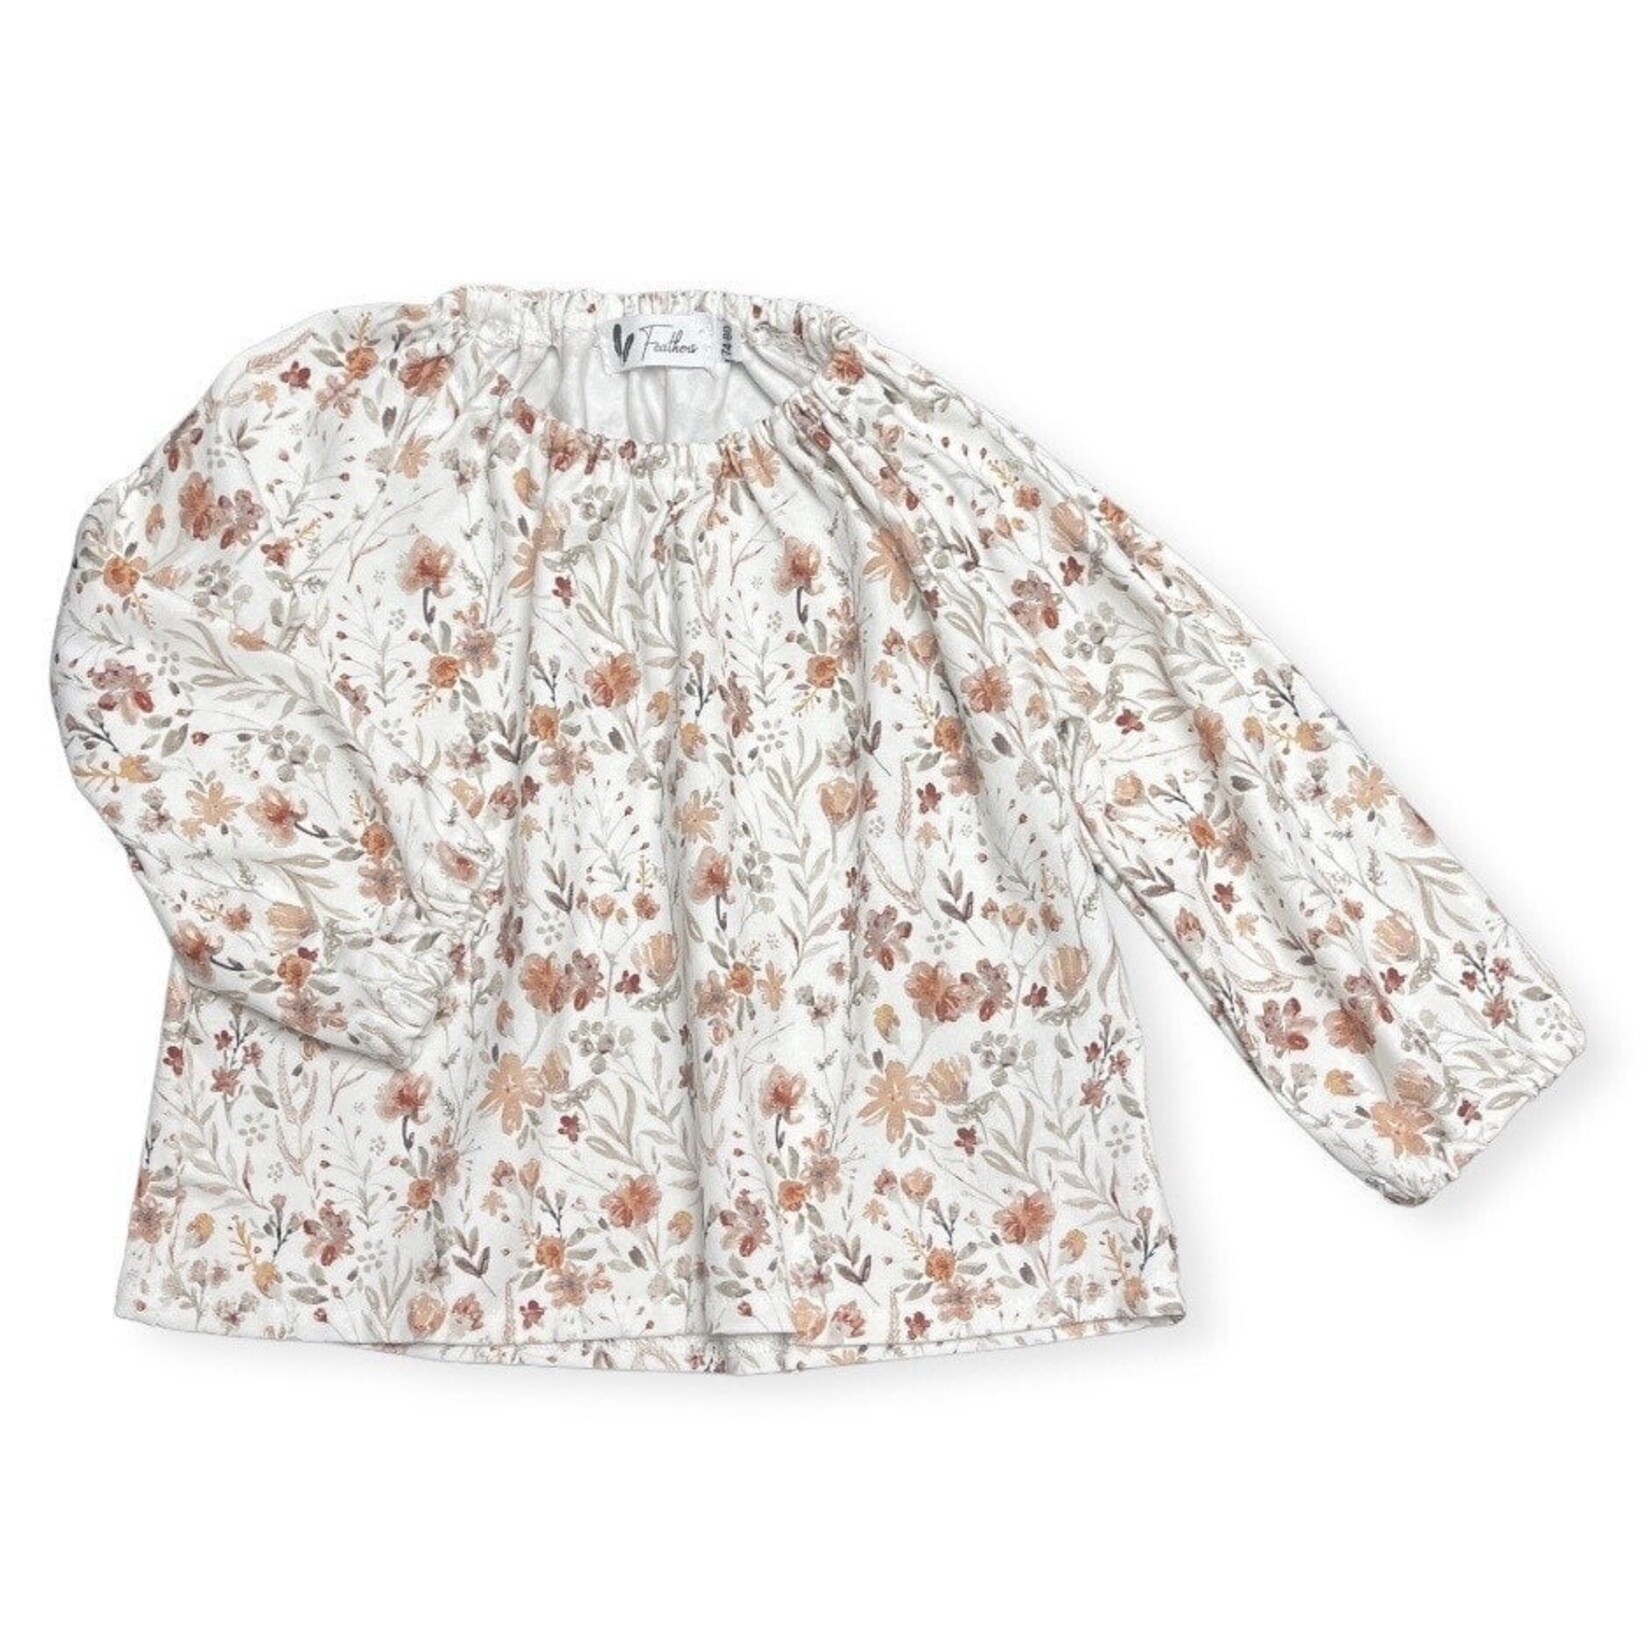 Feathers® Blouse - Water Flower